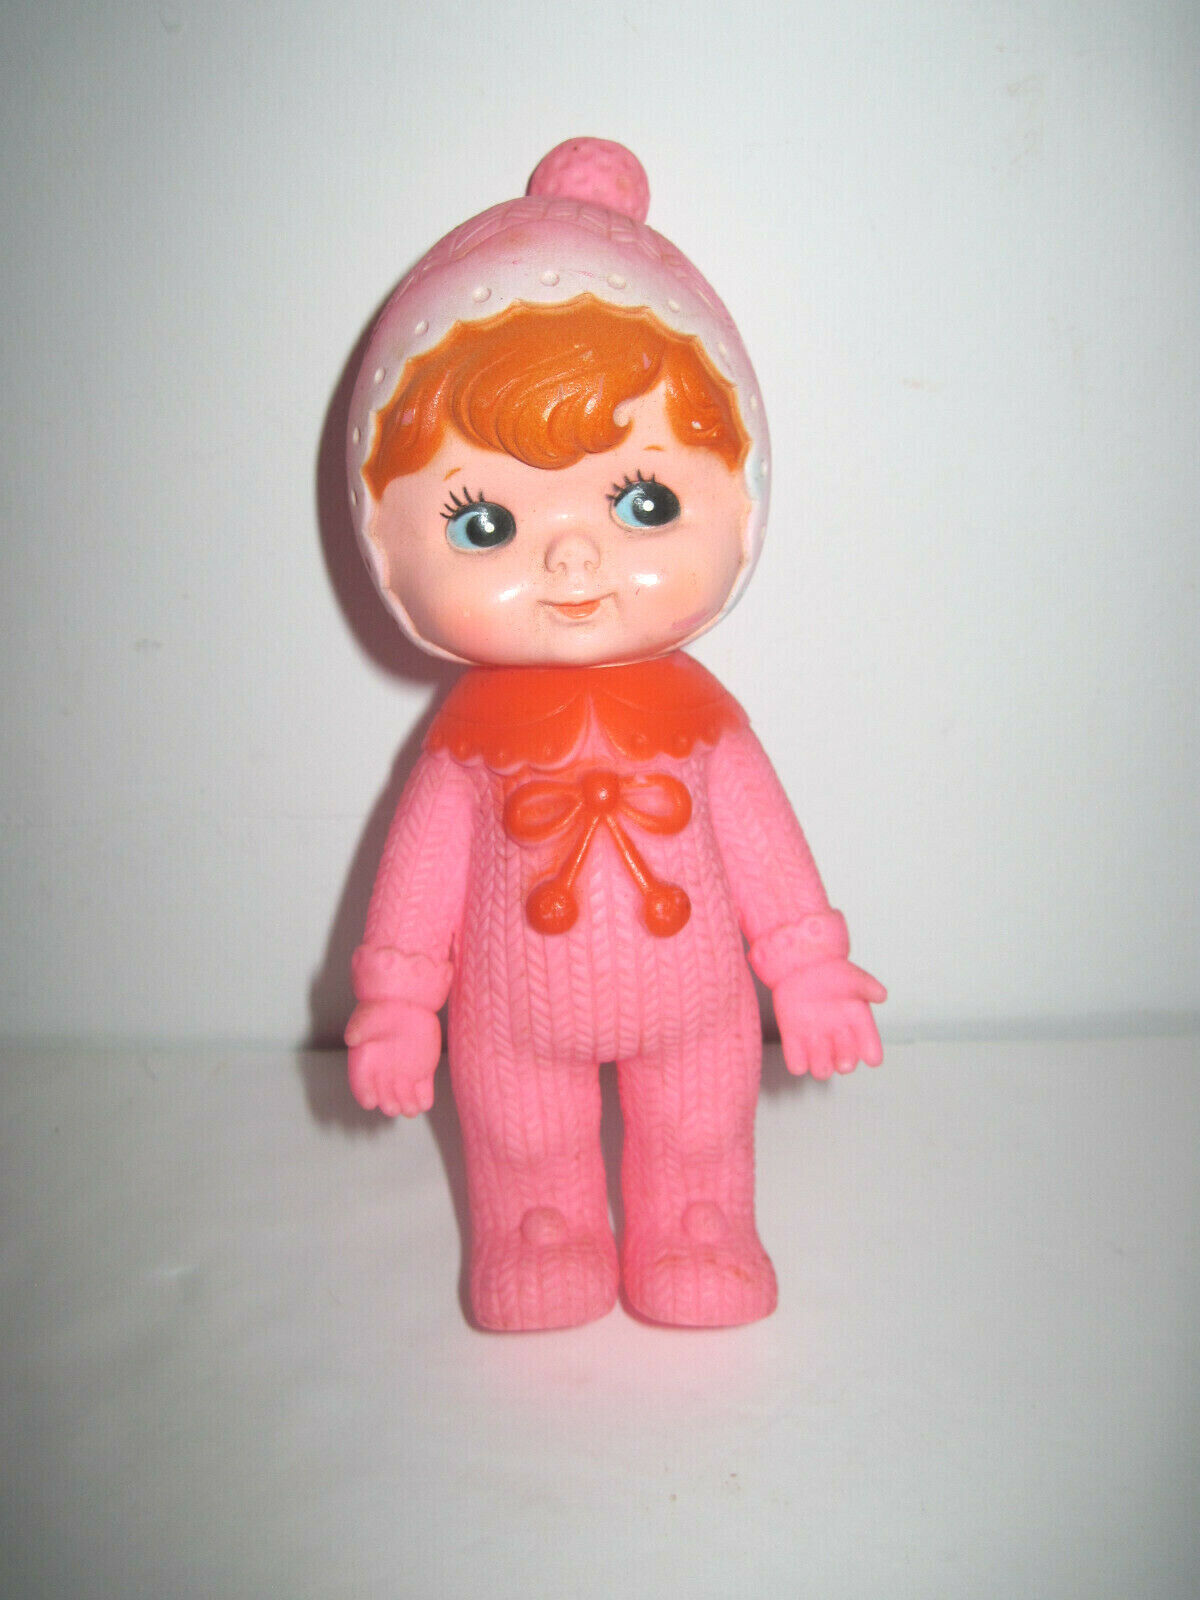 Vintage 1970's Japan Charmy Chan Woodland Doll Pink Girl Squeaker Figure Toy